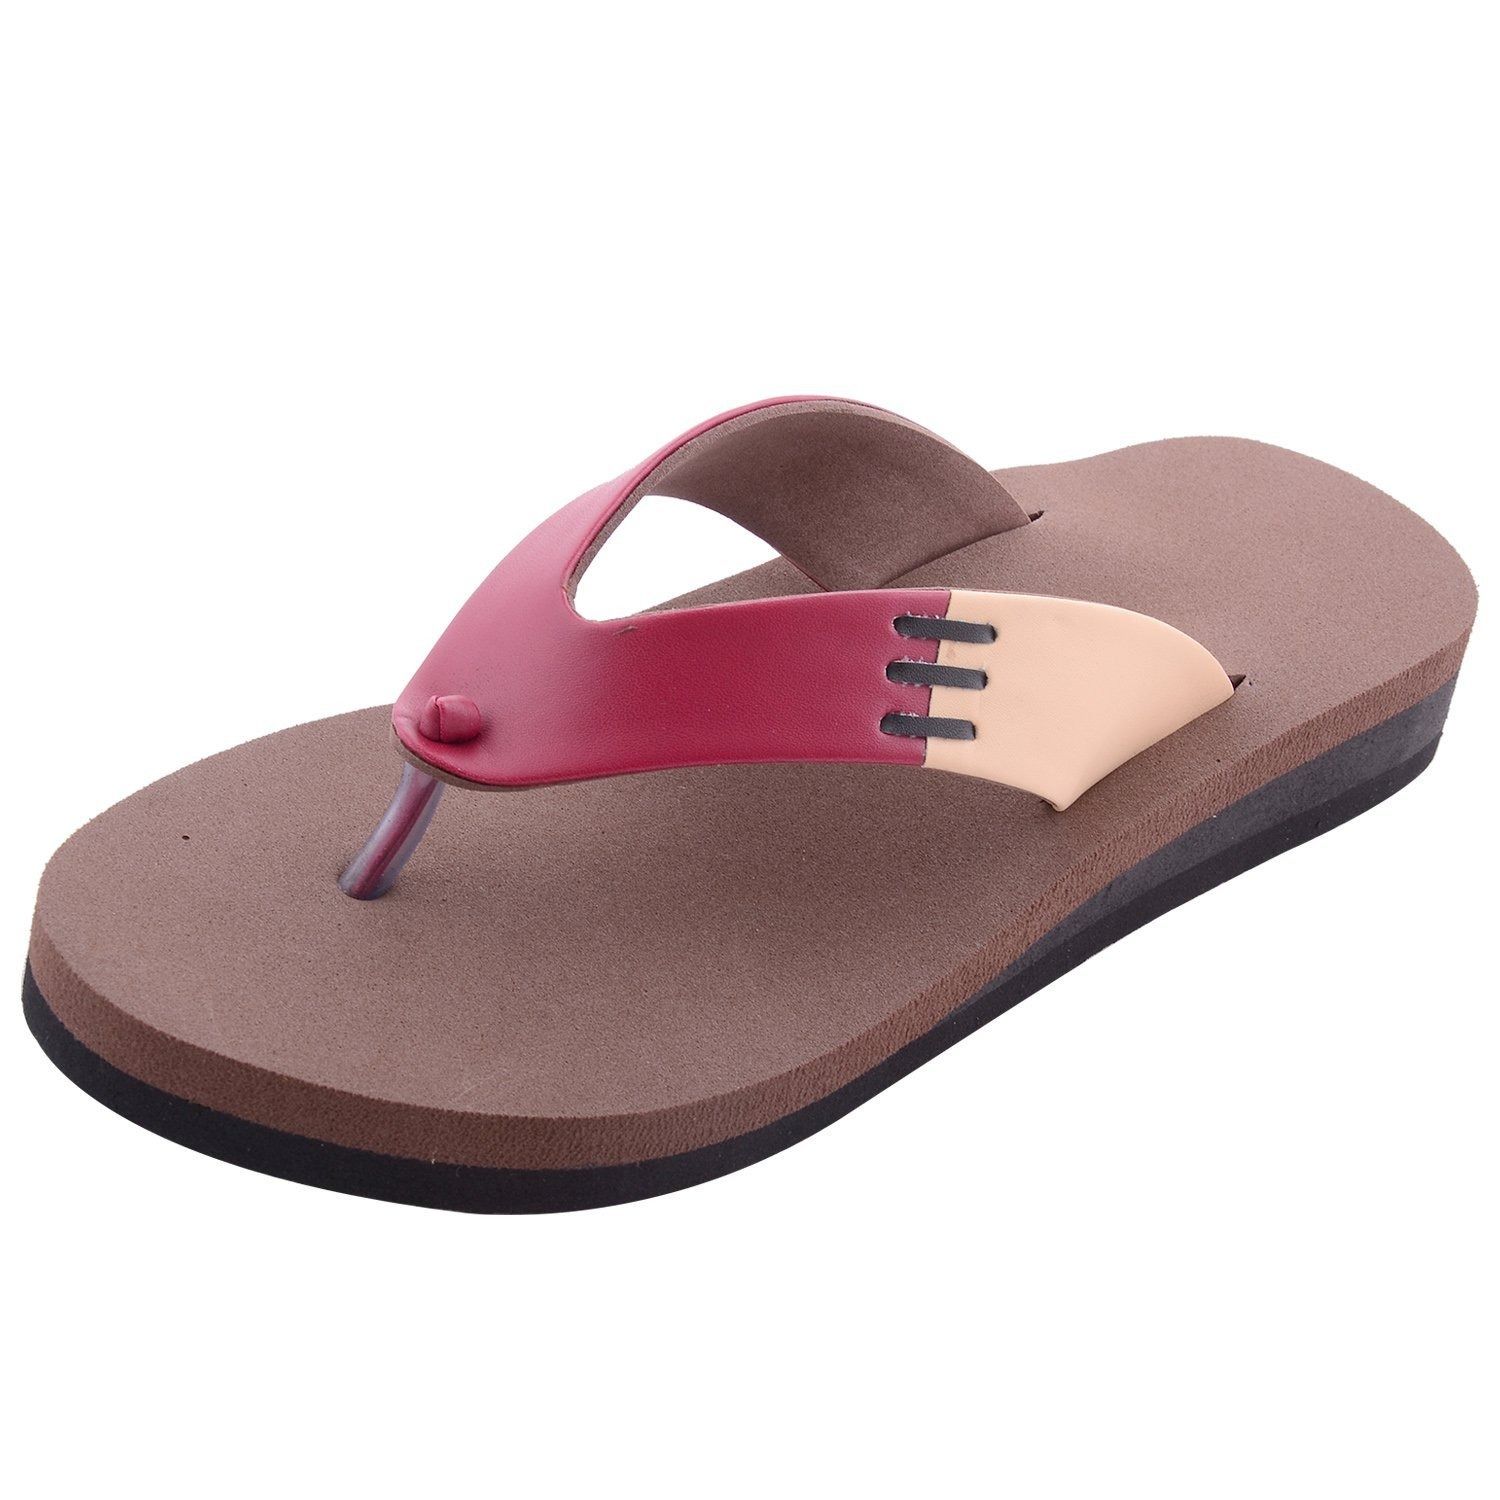 diabetic chappals for ladies